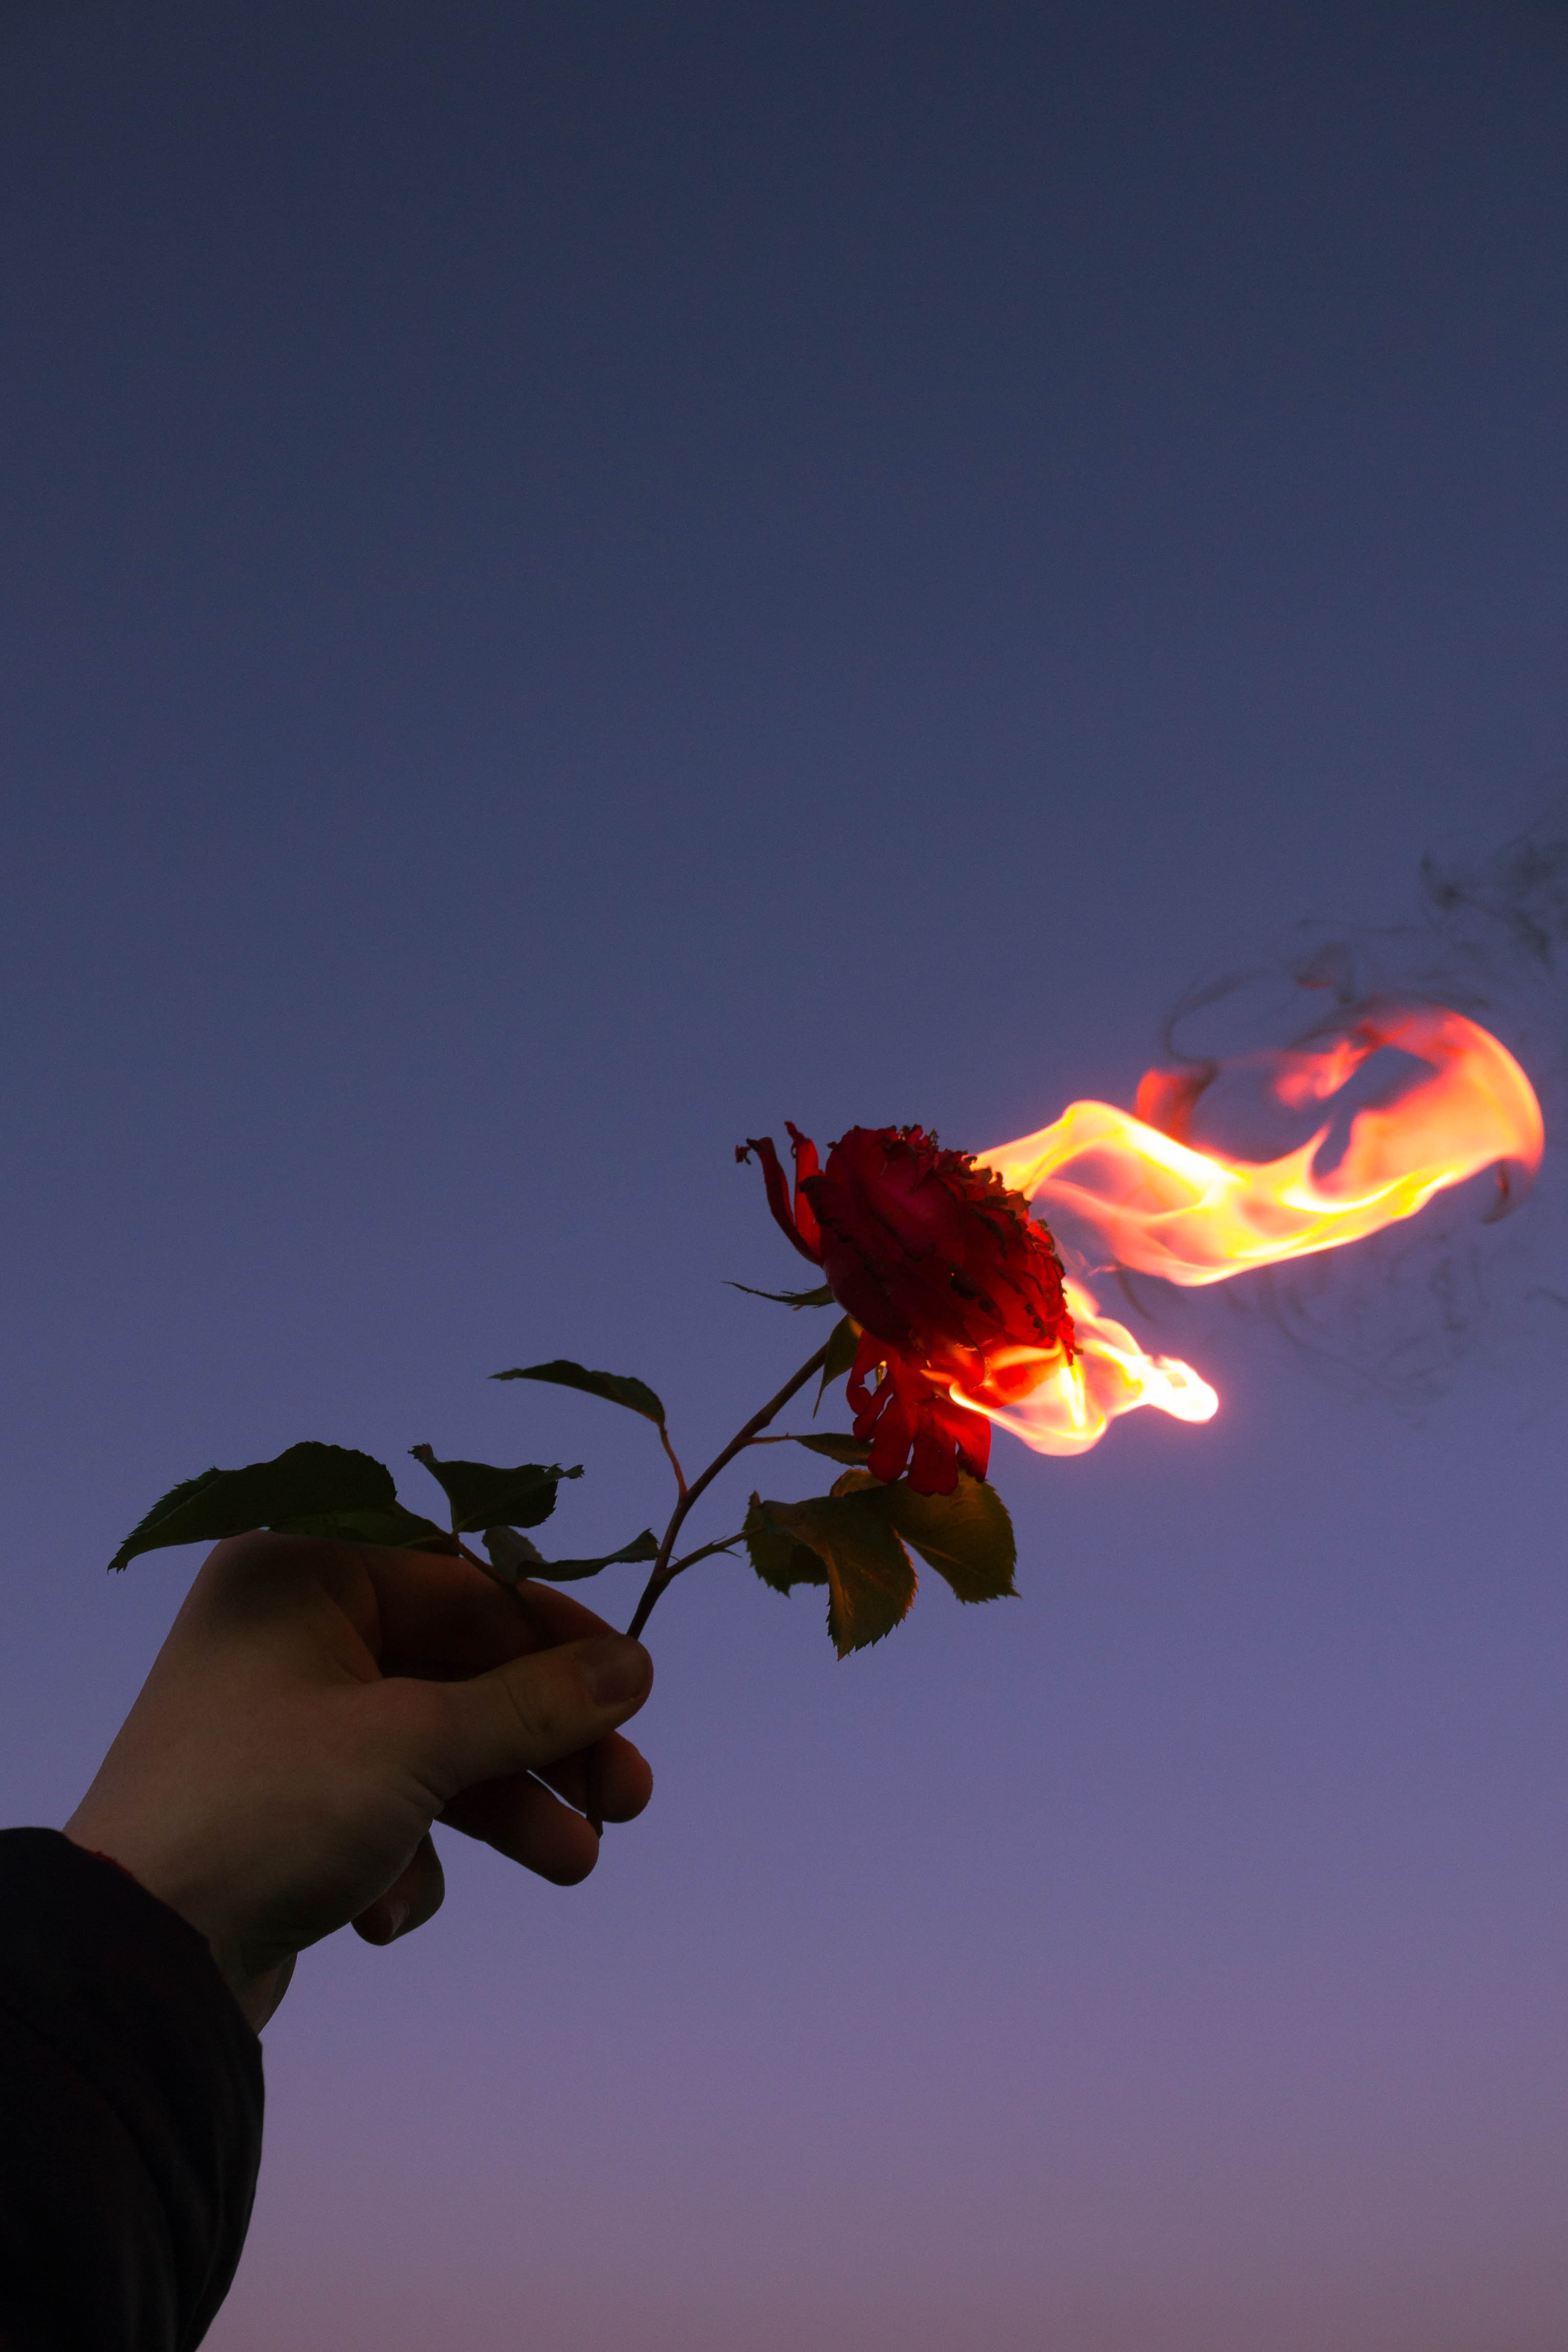 rose, fire, hand, miscellanea, flower, flame, miscellaneous, rose flower